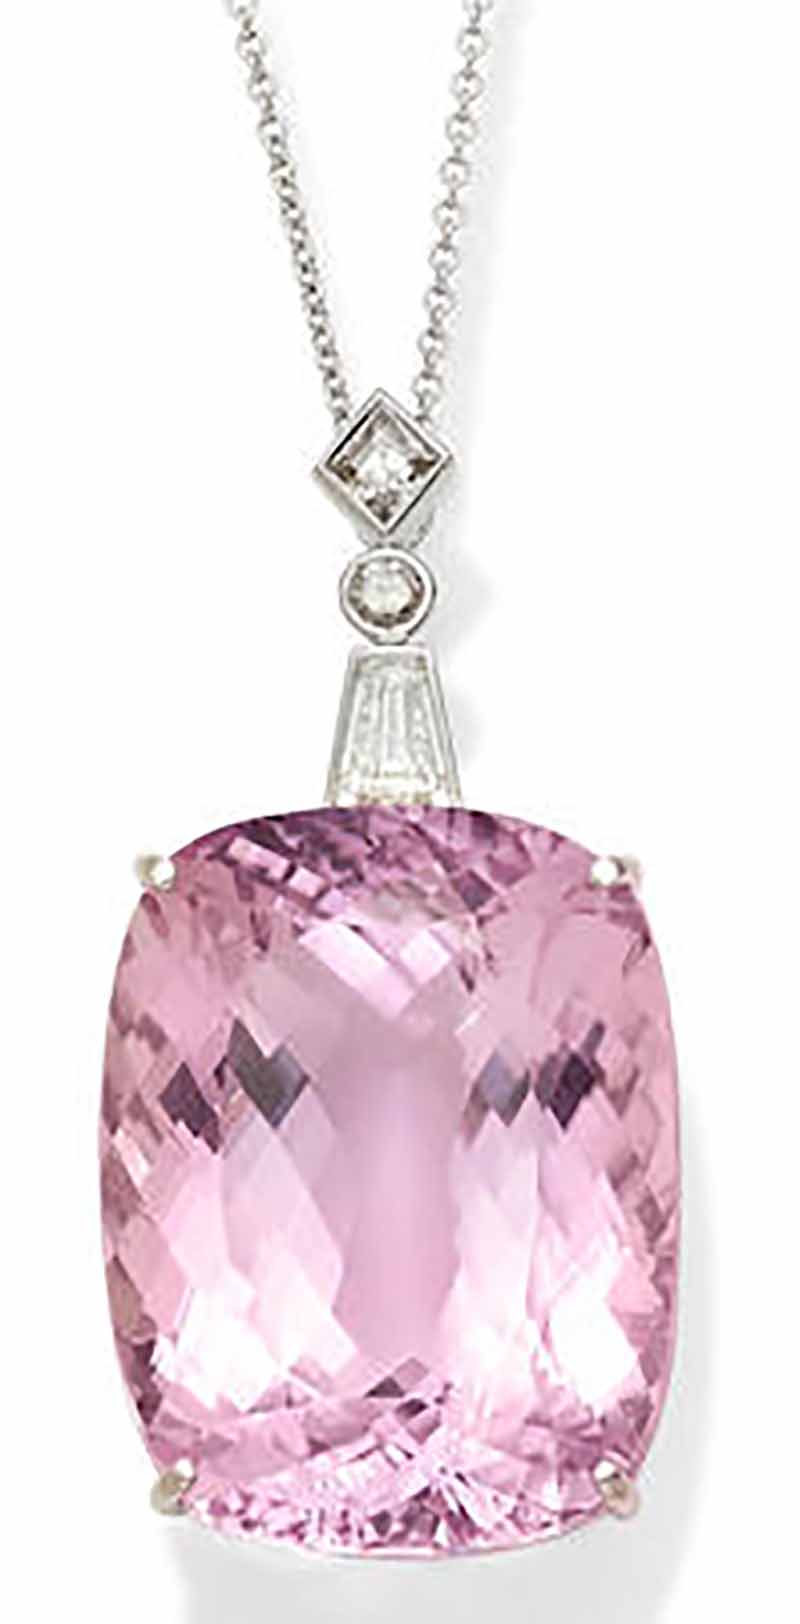 LOT 393 - A KUNZITE, COLORED DIAMOND AND WHITE GOLD PENDANT NECKLACE